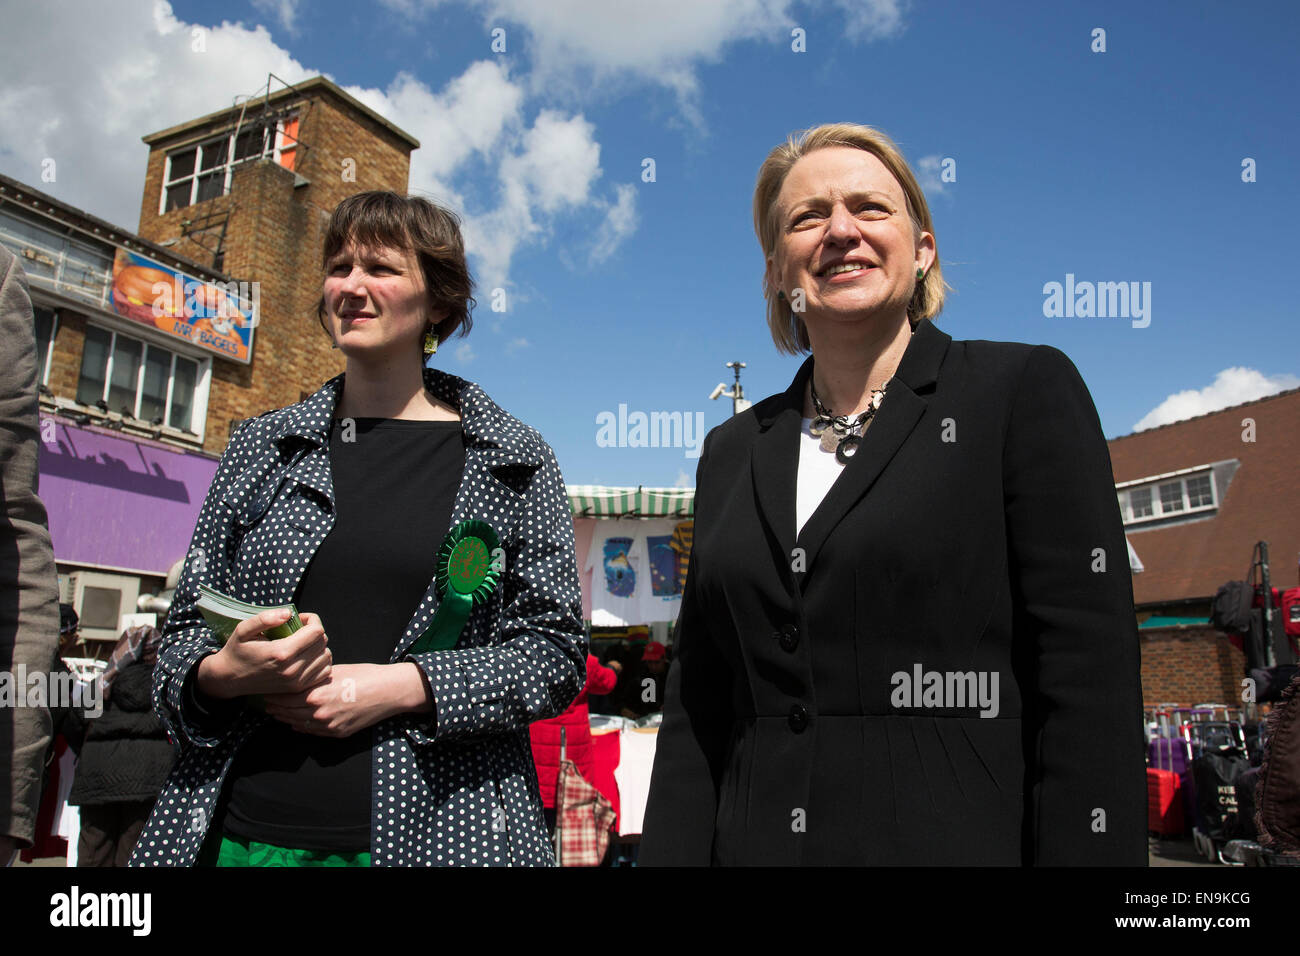 London, UK. Thursday 30th April 2015. Leader of the Green Party, Natalie Bennett pays a visit to talk to local people at Ridley Road Market in Dalston, Borough of Hackney, at the heart of multicultural East London. Natalie Bennett is an Australian-born British politician and journalist. She was elected to her position as the leader of the Green Party of England and Wales in 2012. Credit:  Michael Kemp/Alamy Live News Stock Photo